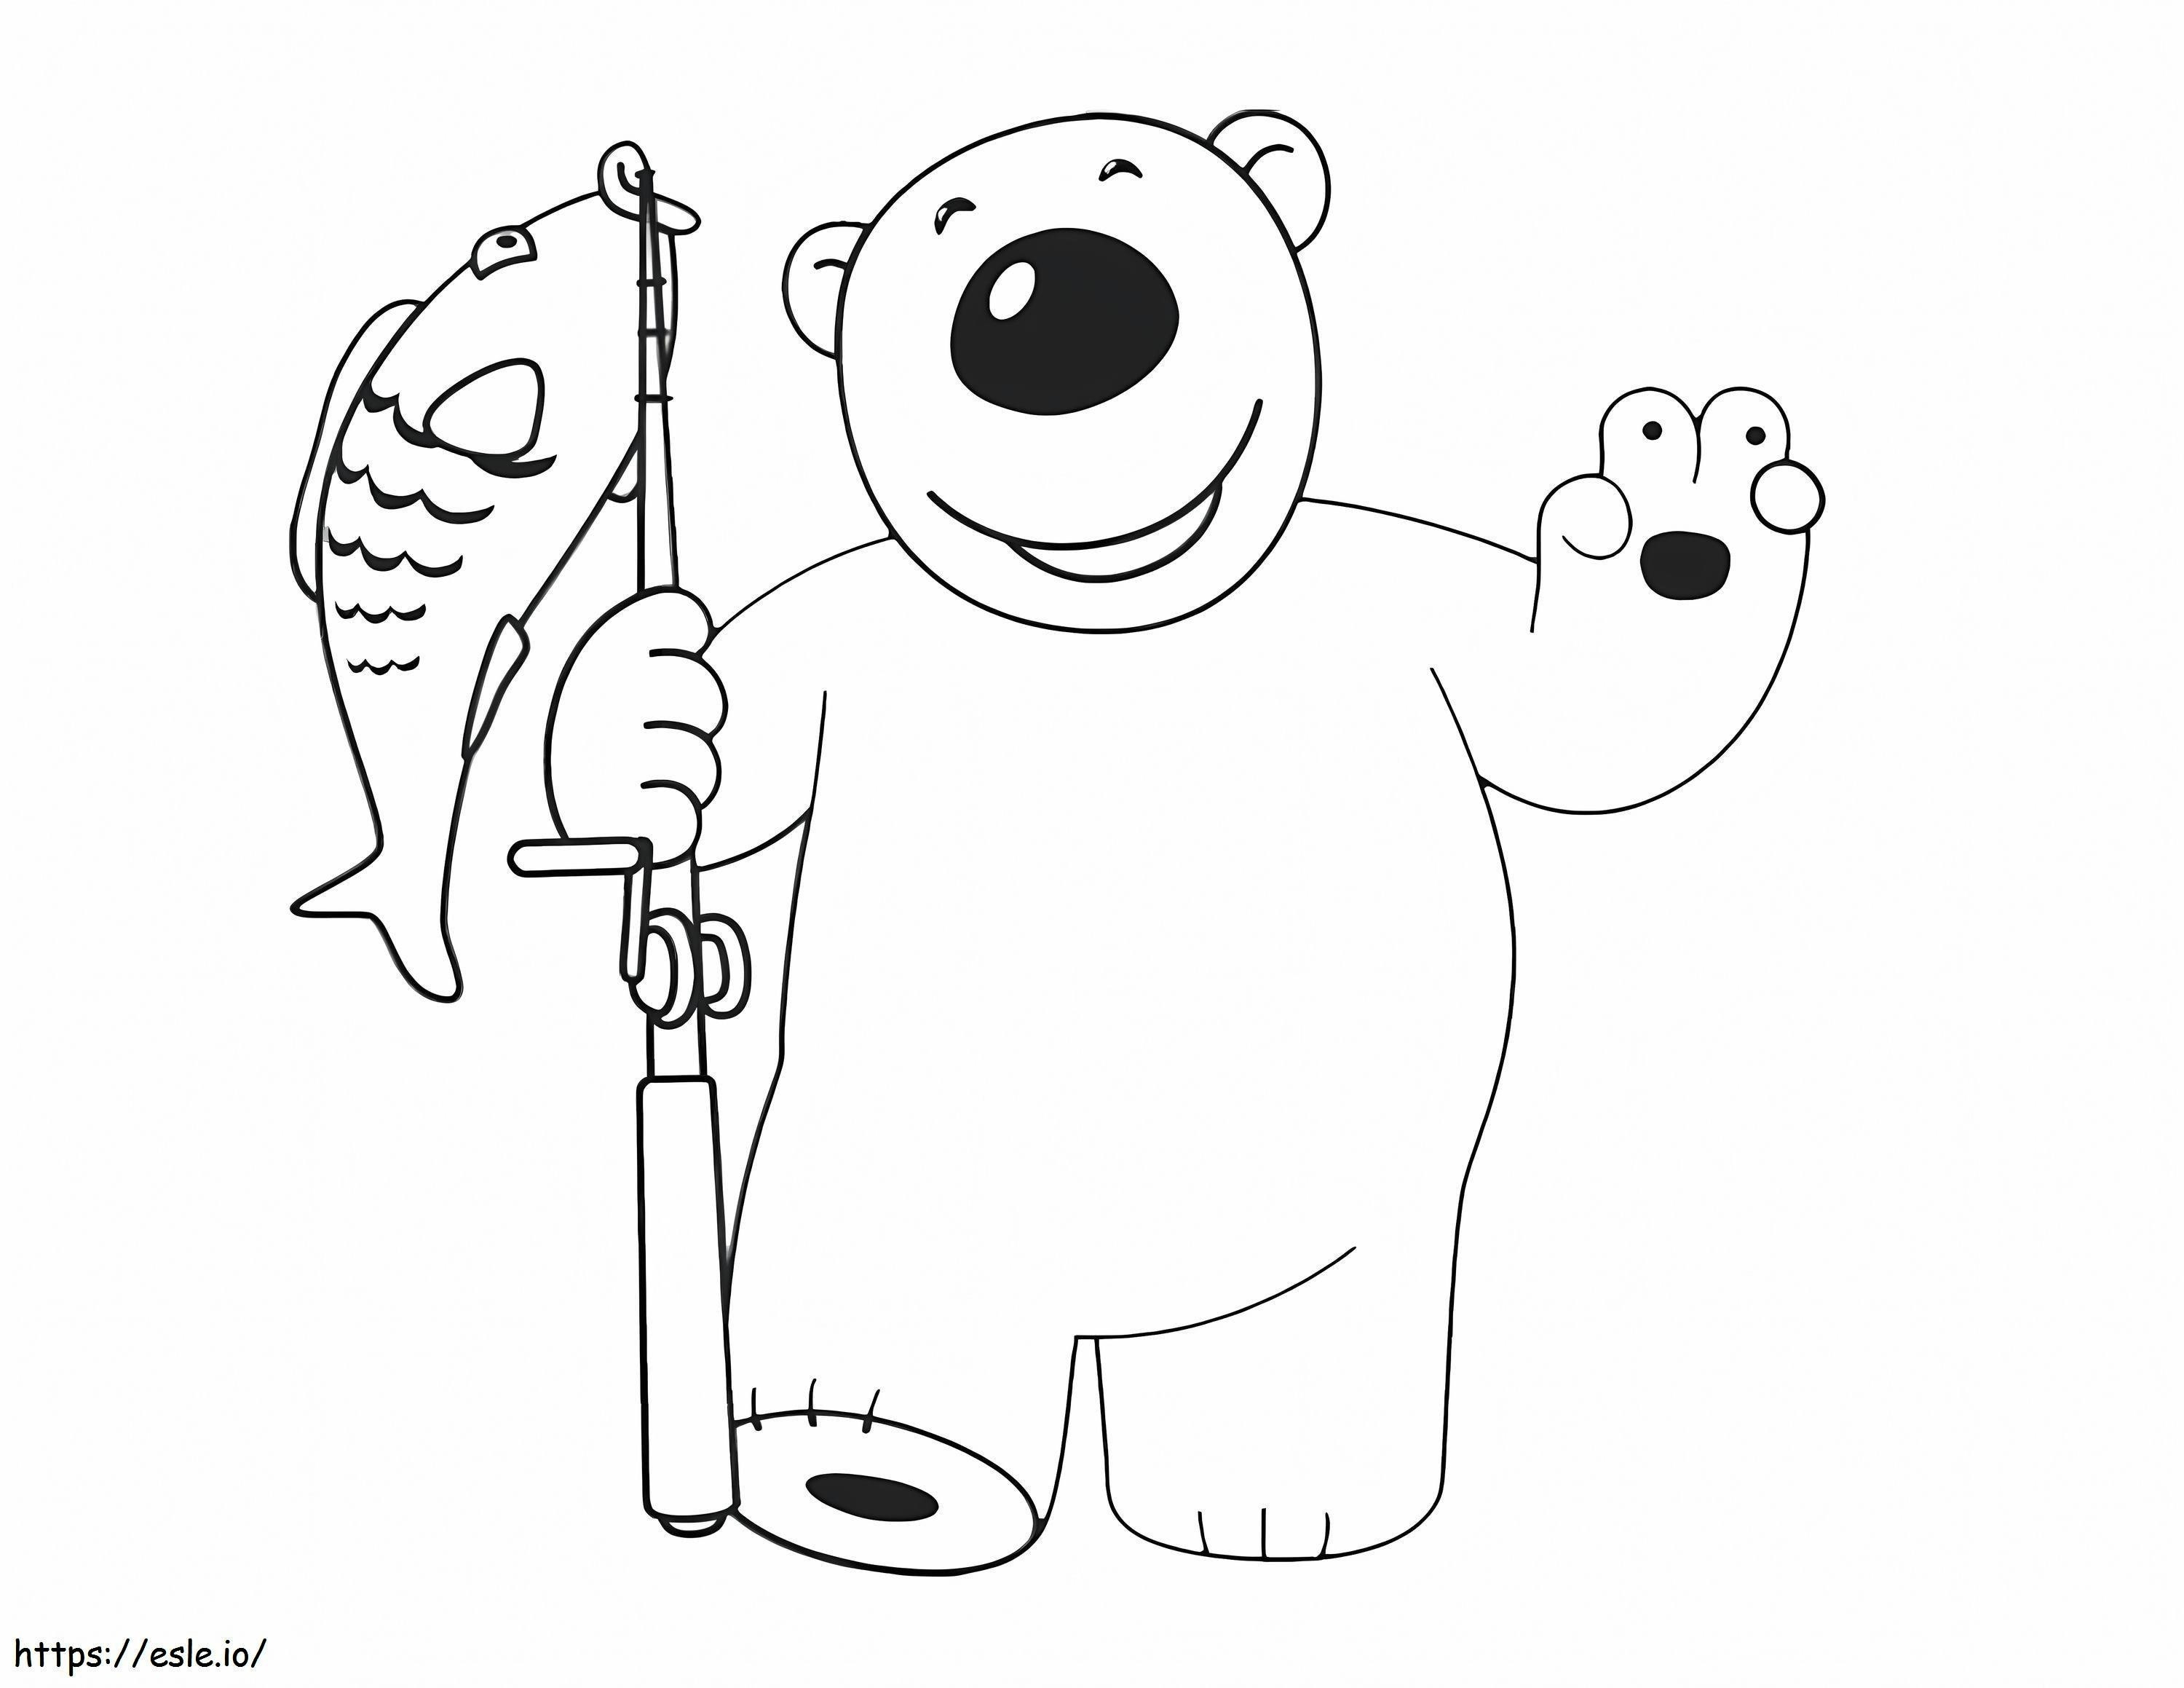 Poby Bear Fishing coloring page